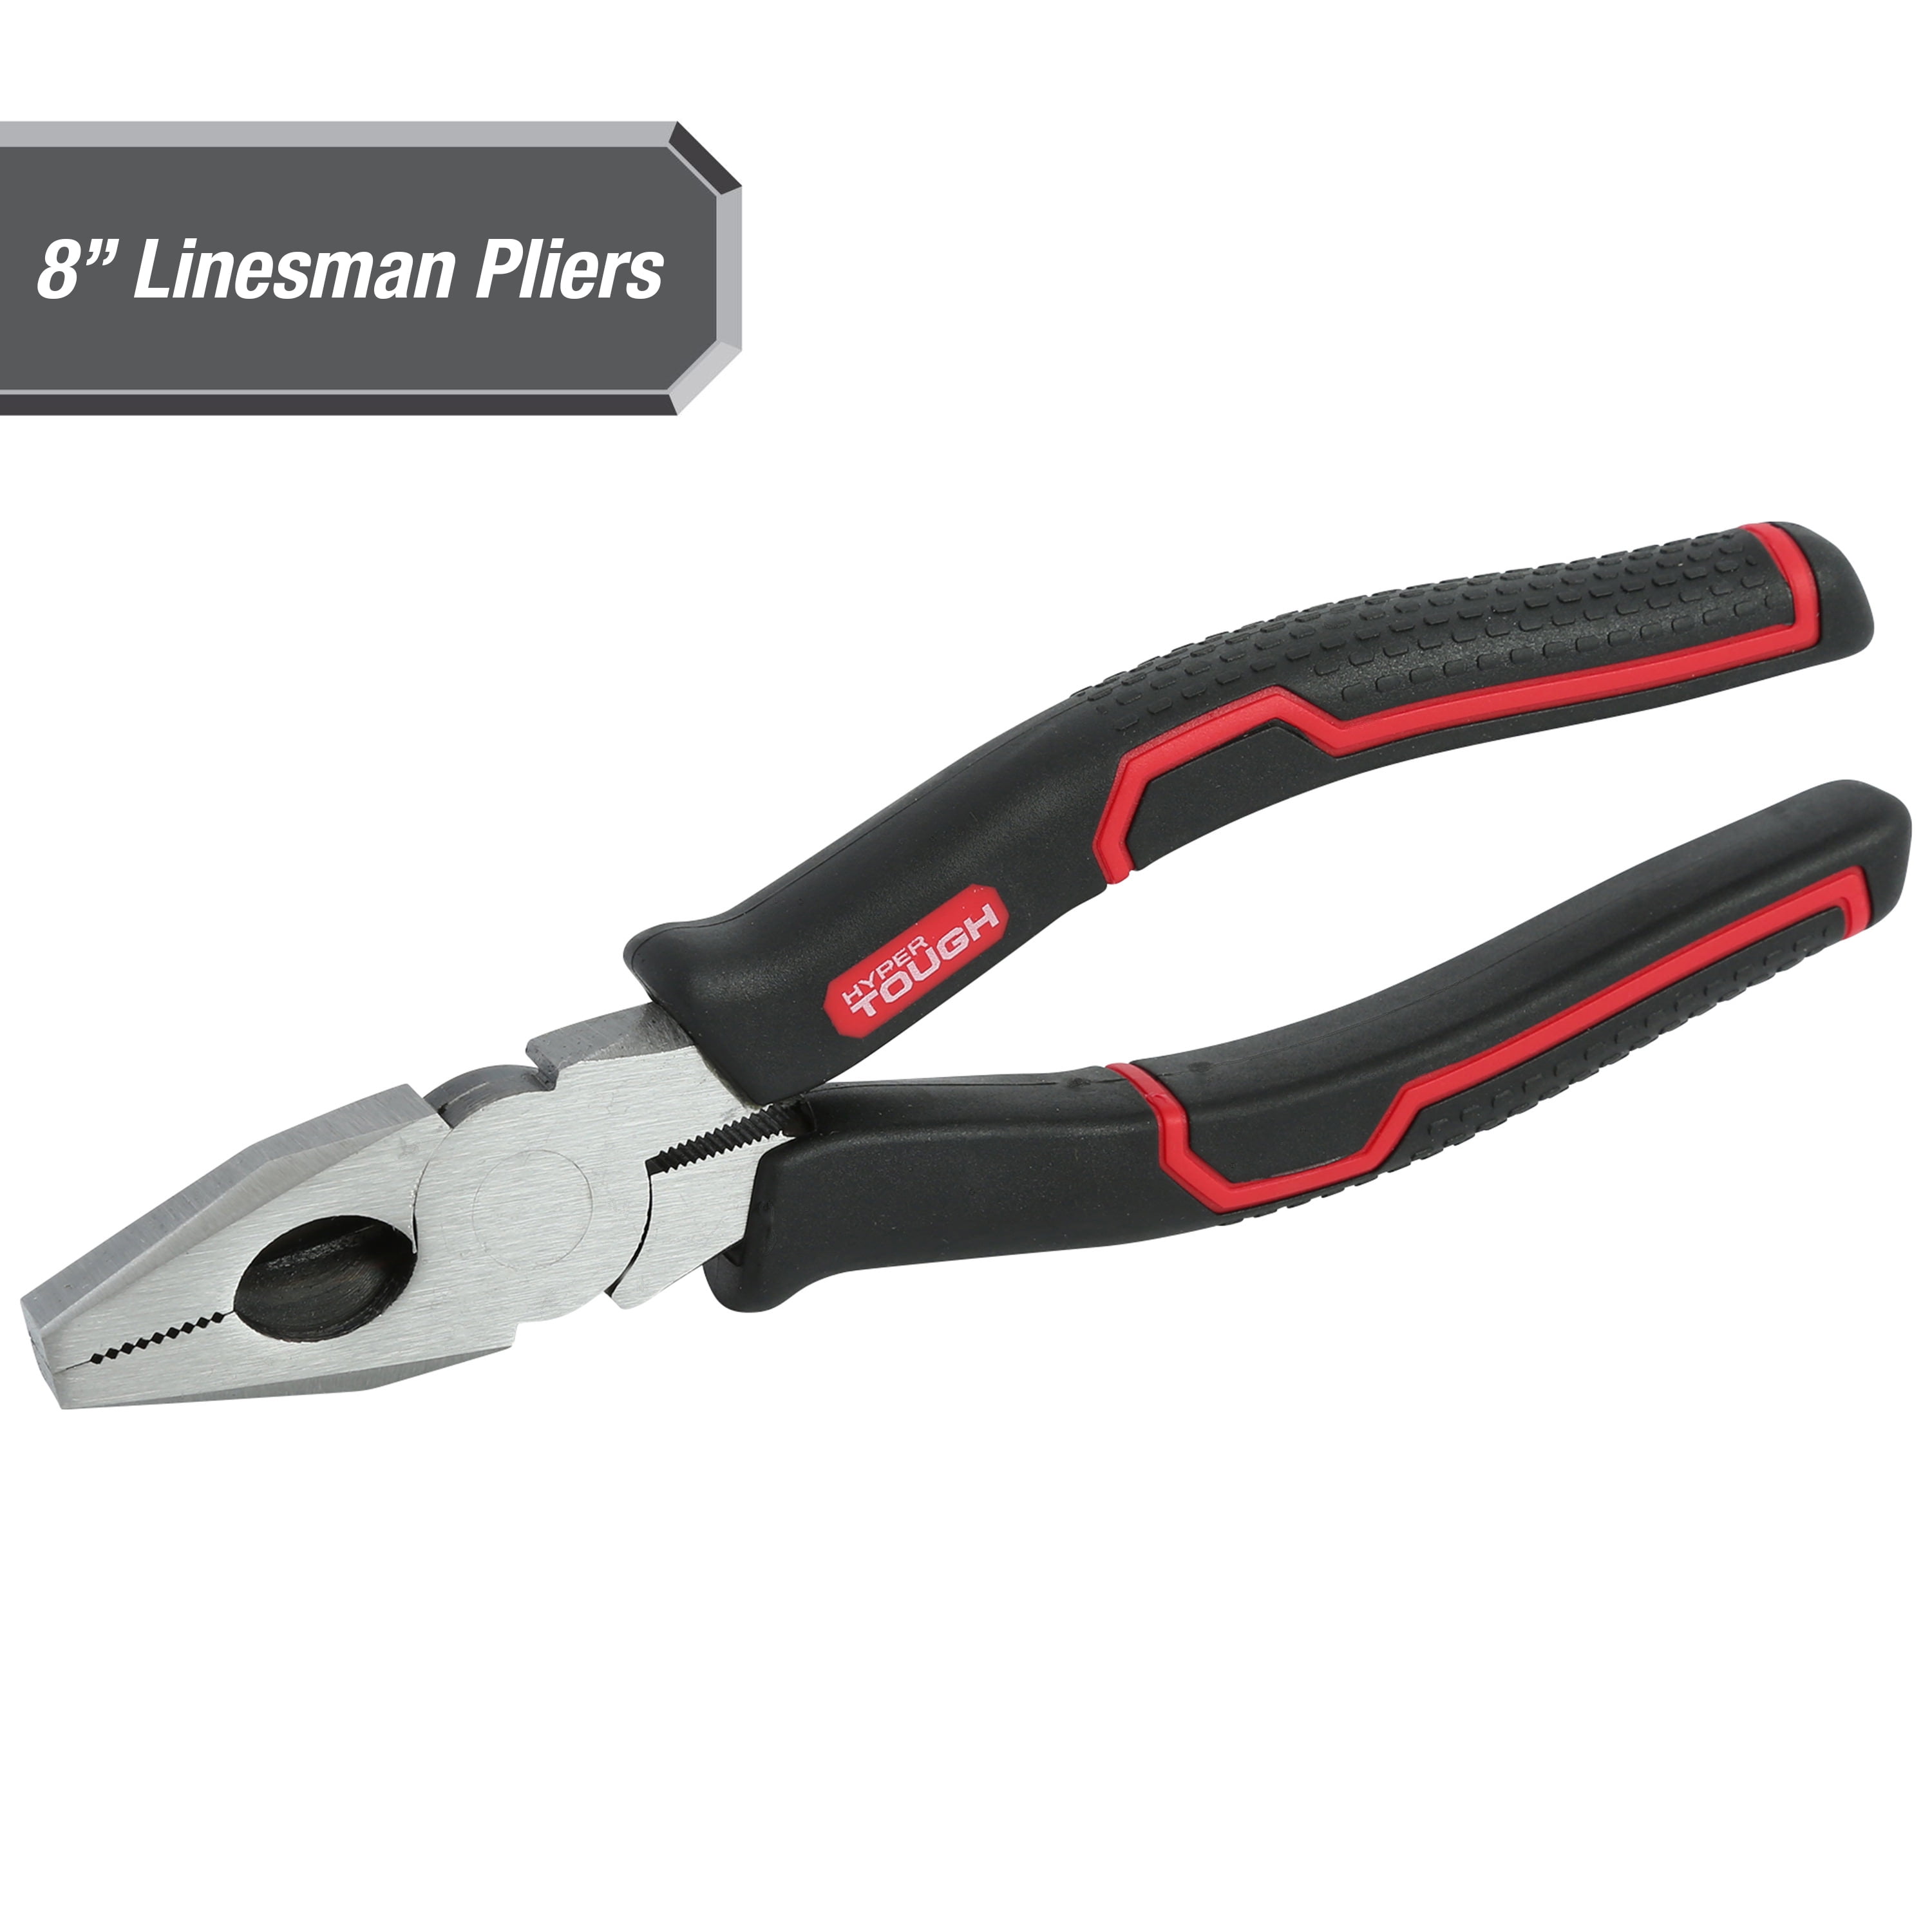 Hyper Tough 8-inch Linesman Pliers with Ergonomic Soft Grips